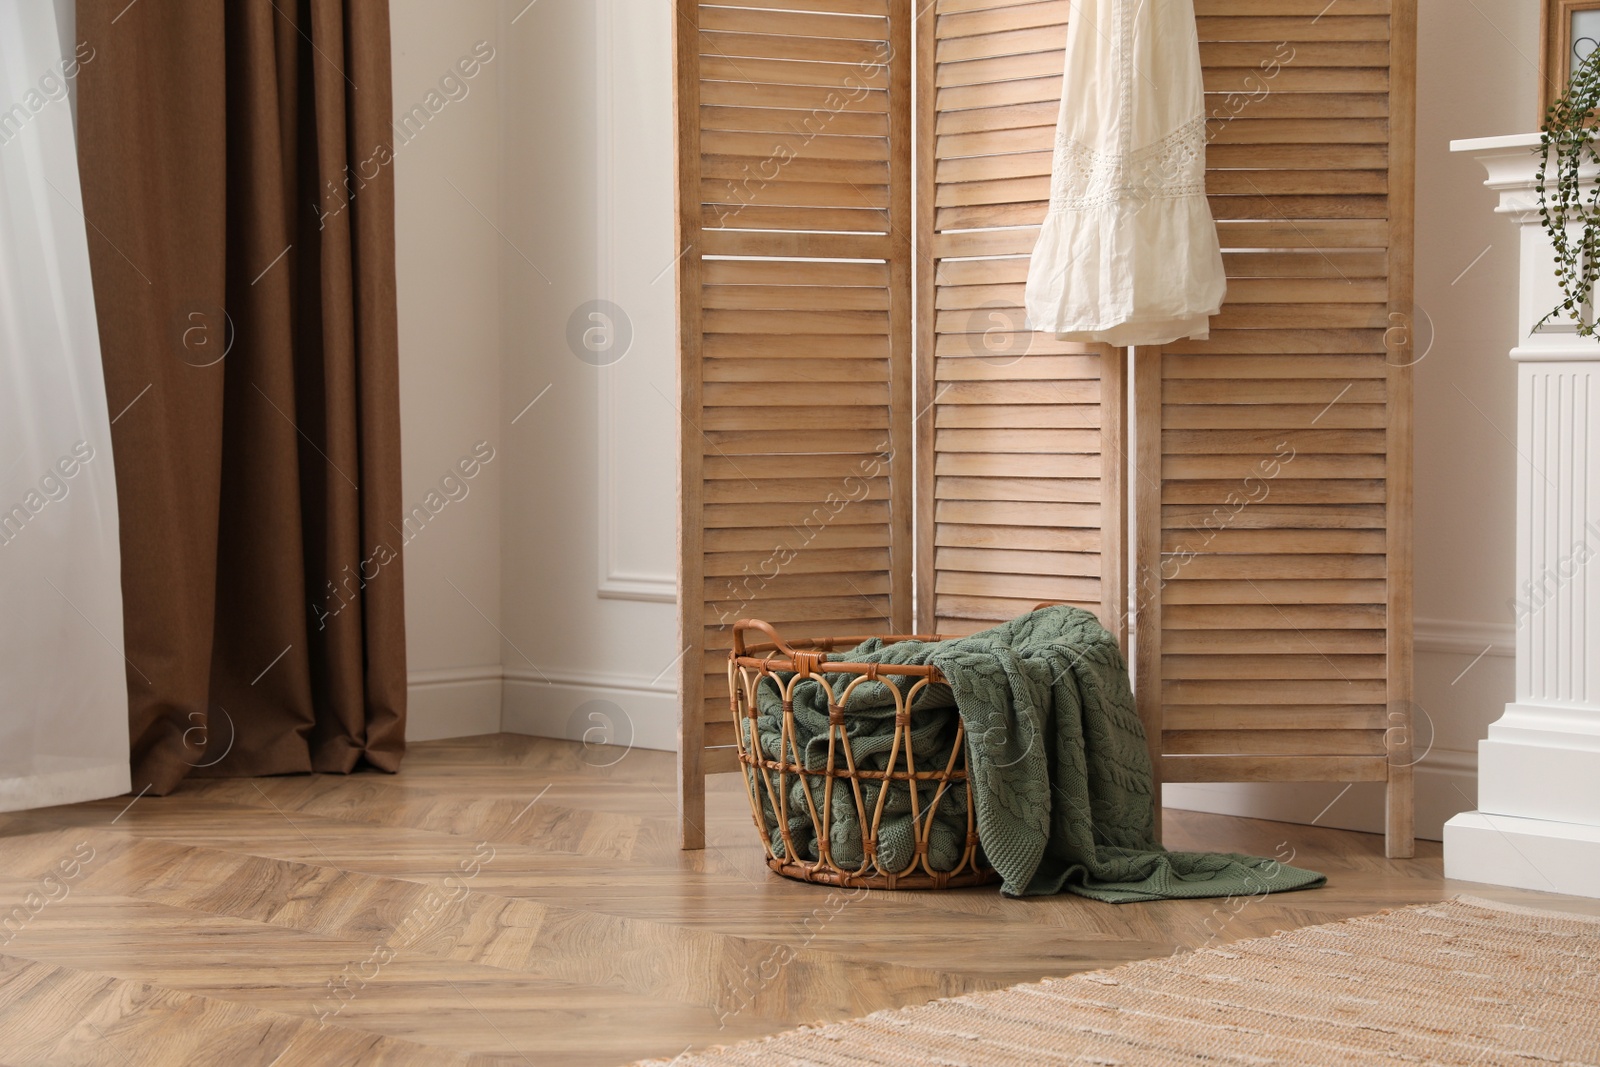 Photo of Wooden folding screen and wicker basket with blanket in room. Interior design